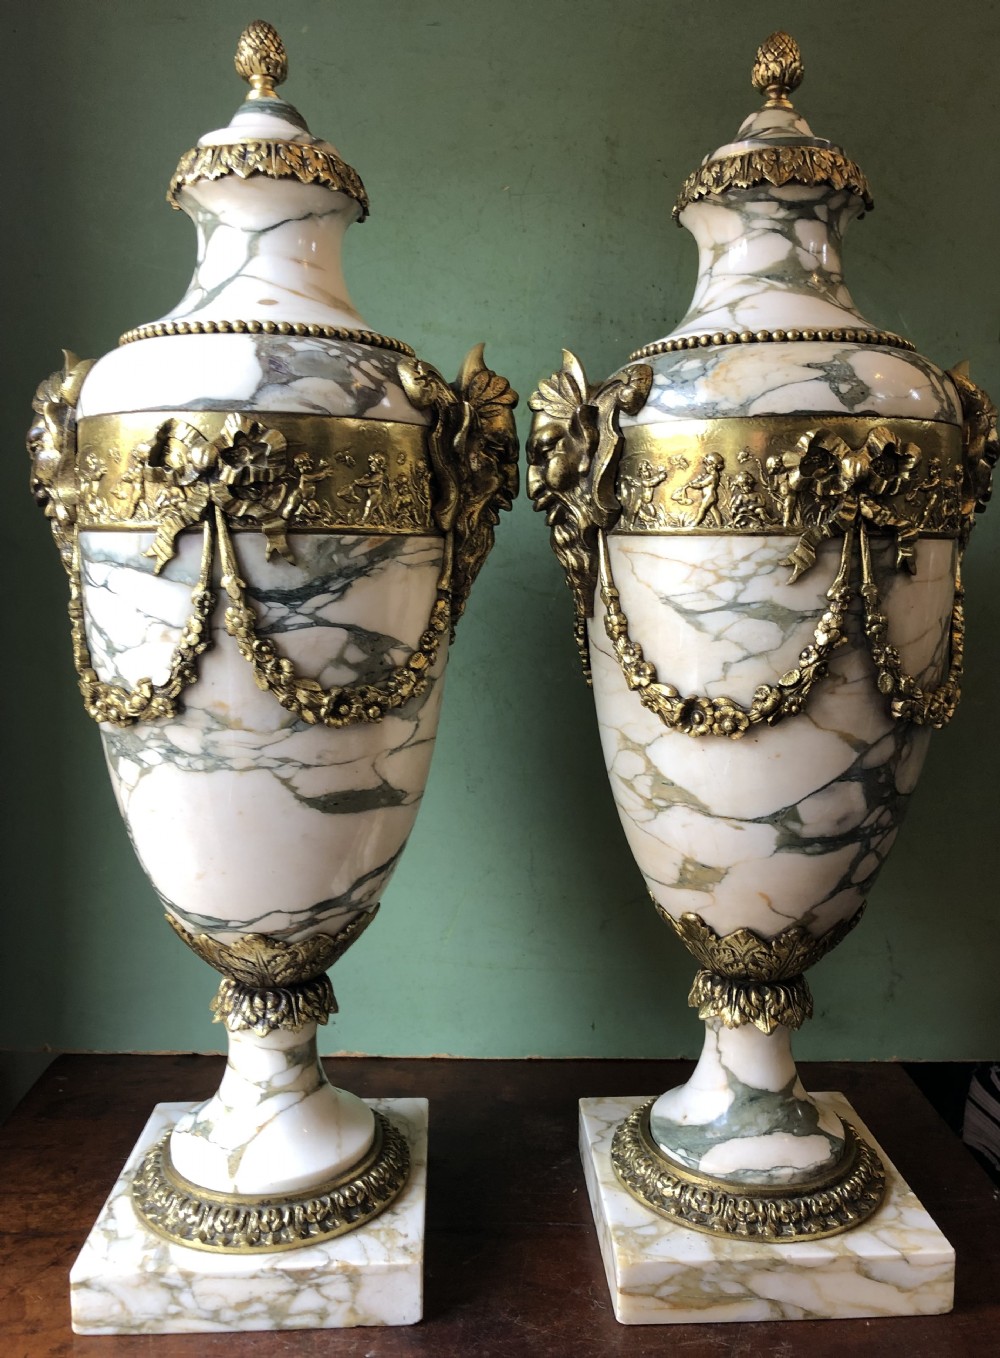 impressive large scale pair of late c19th french ormolu mounted marble vases or cassolettes in the louis xvi style